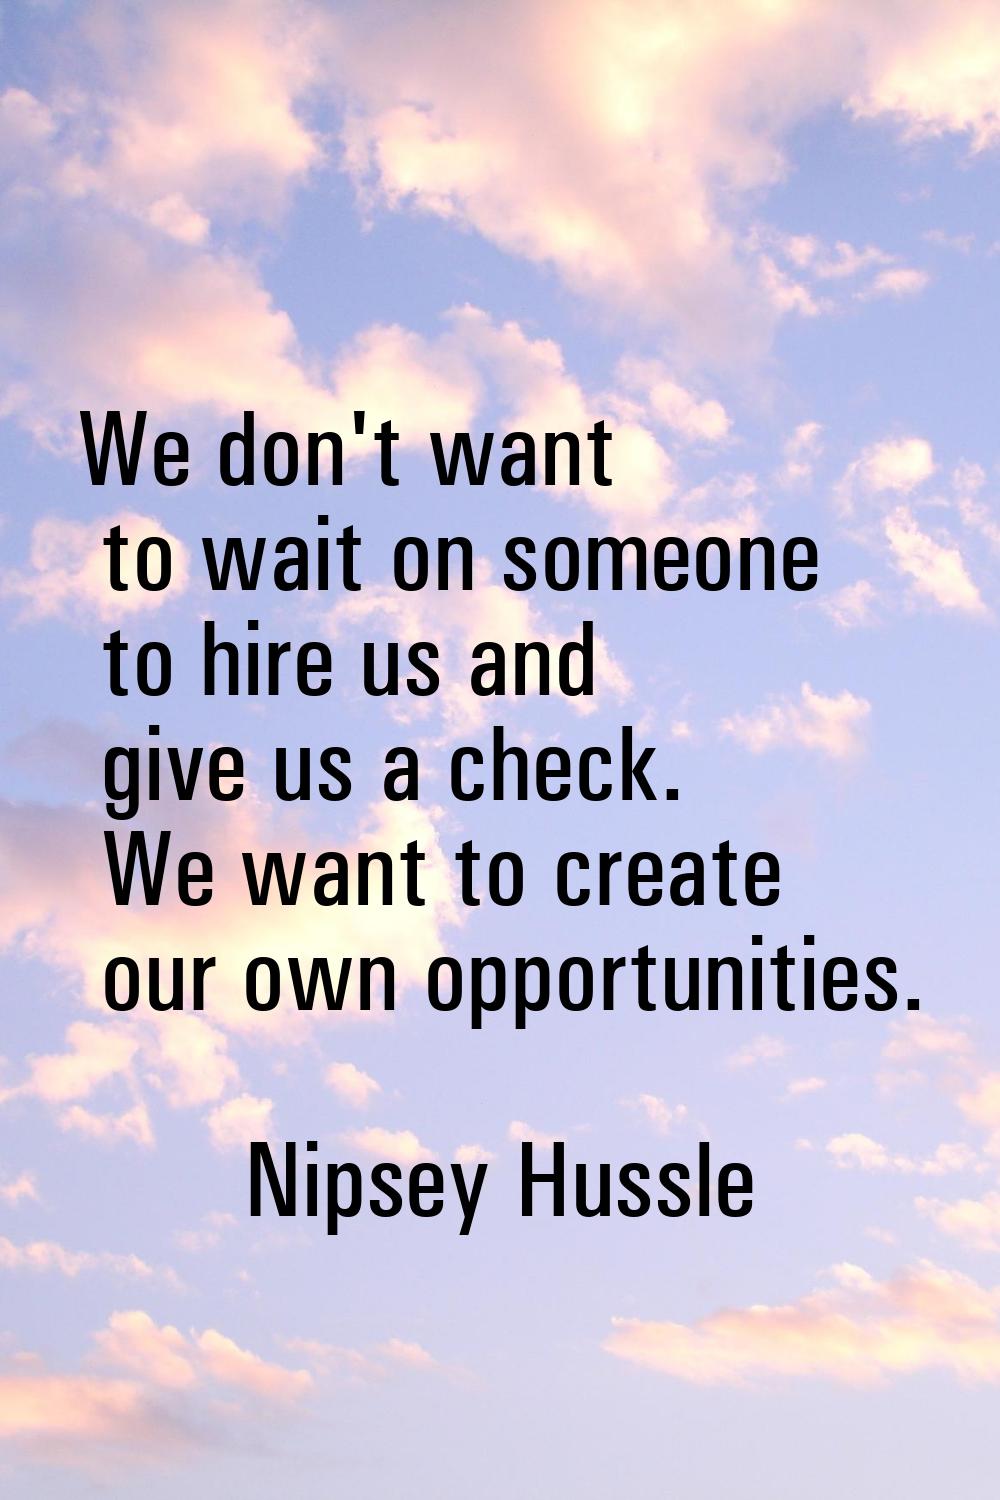 We don't want to wait on someone to hire us and give us a check. We want to create our own opportun